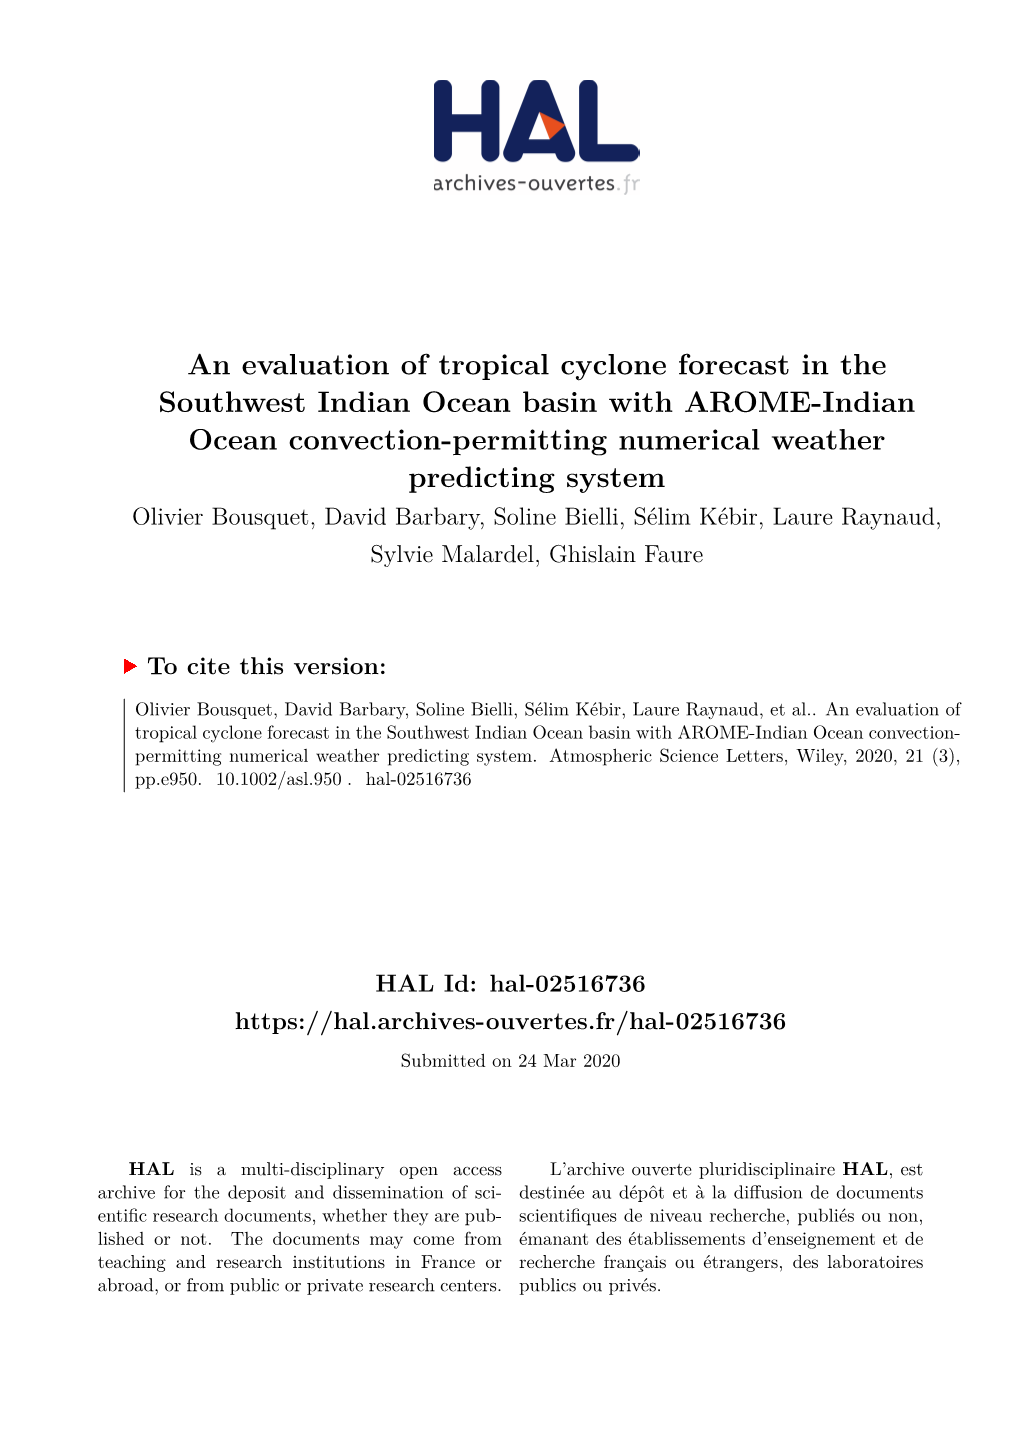 An Evaluation of Tropical Cyclone Forecast In